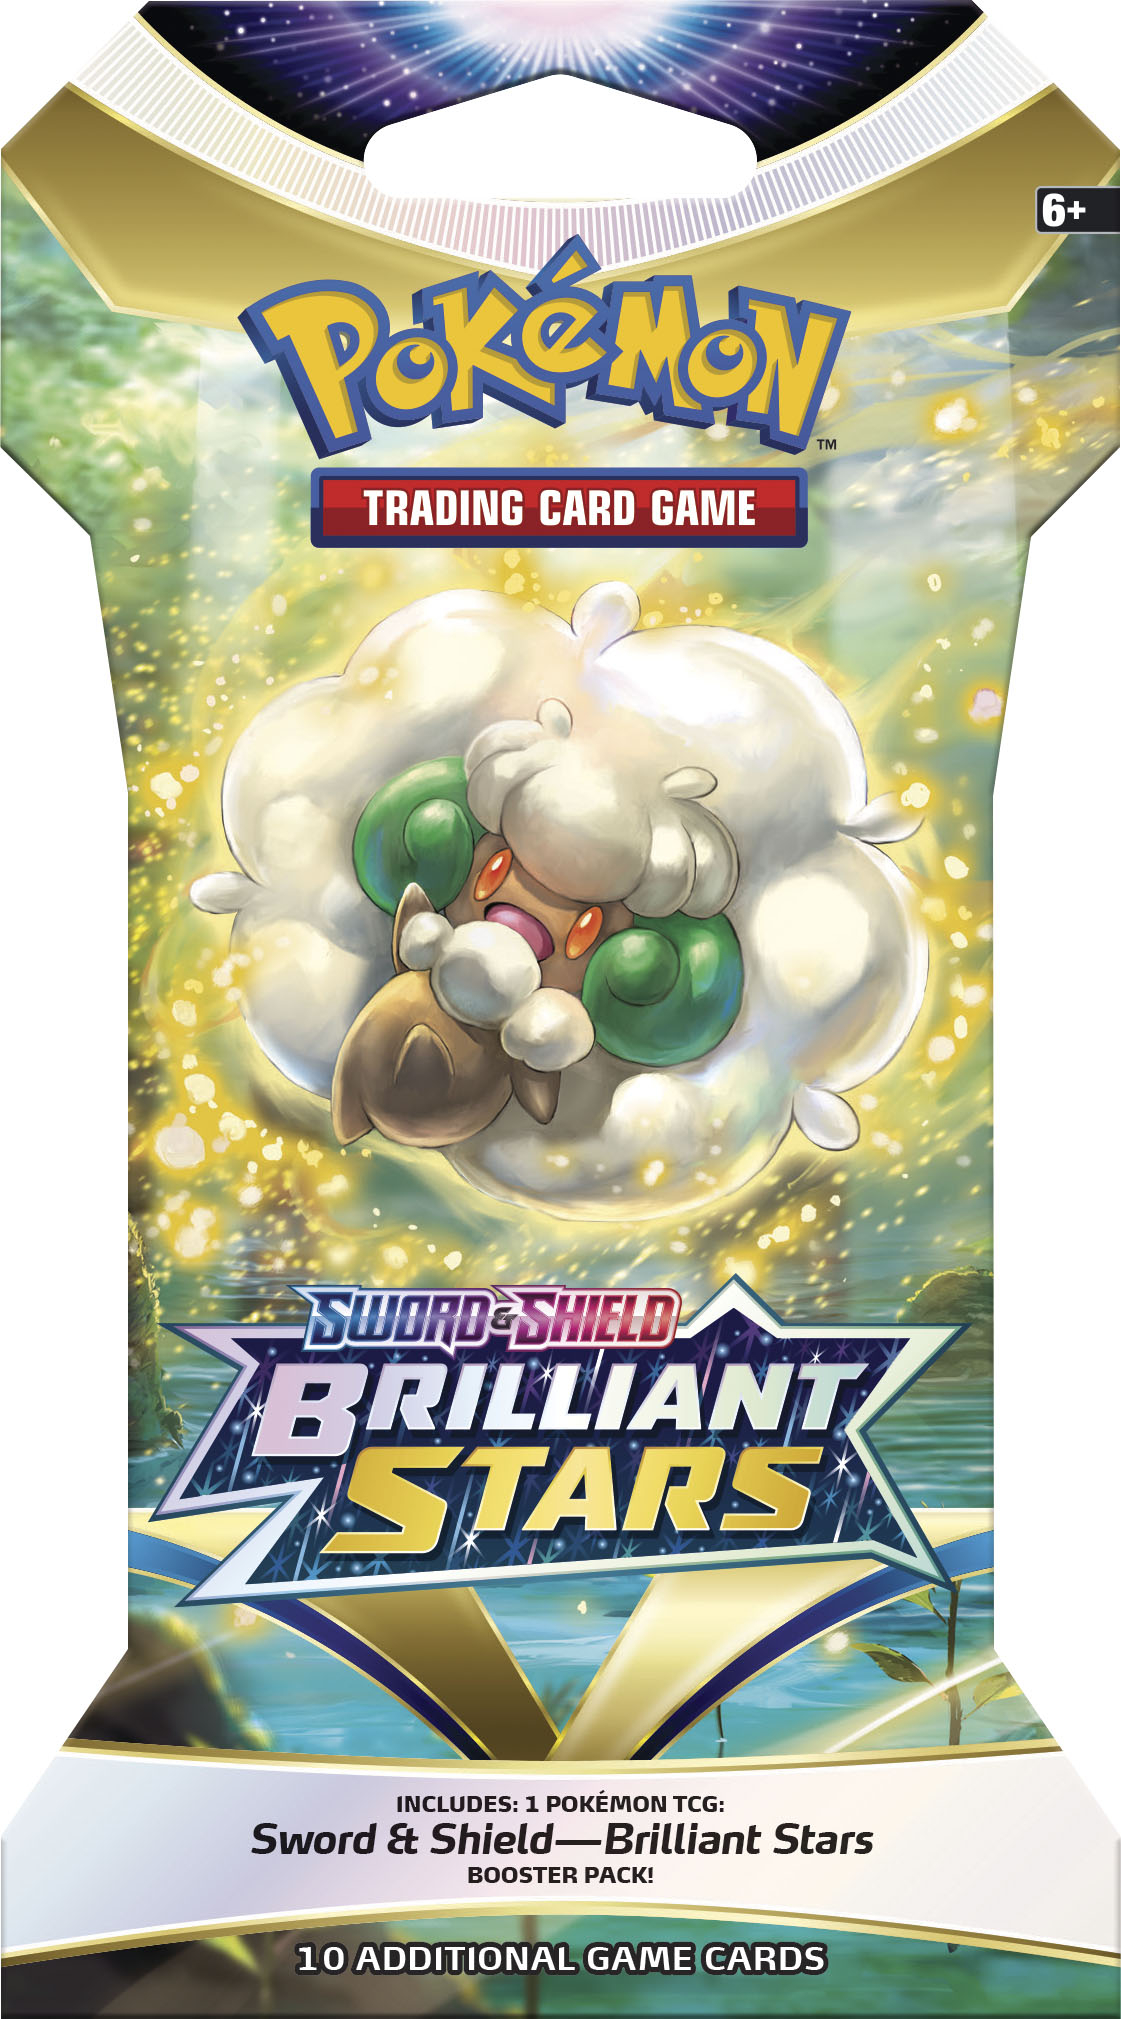 Pokémon XY Evolutions Sleeved Booster Trading Cards Styles May Vary 80156 -  Best Buy